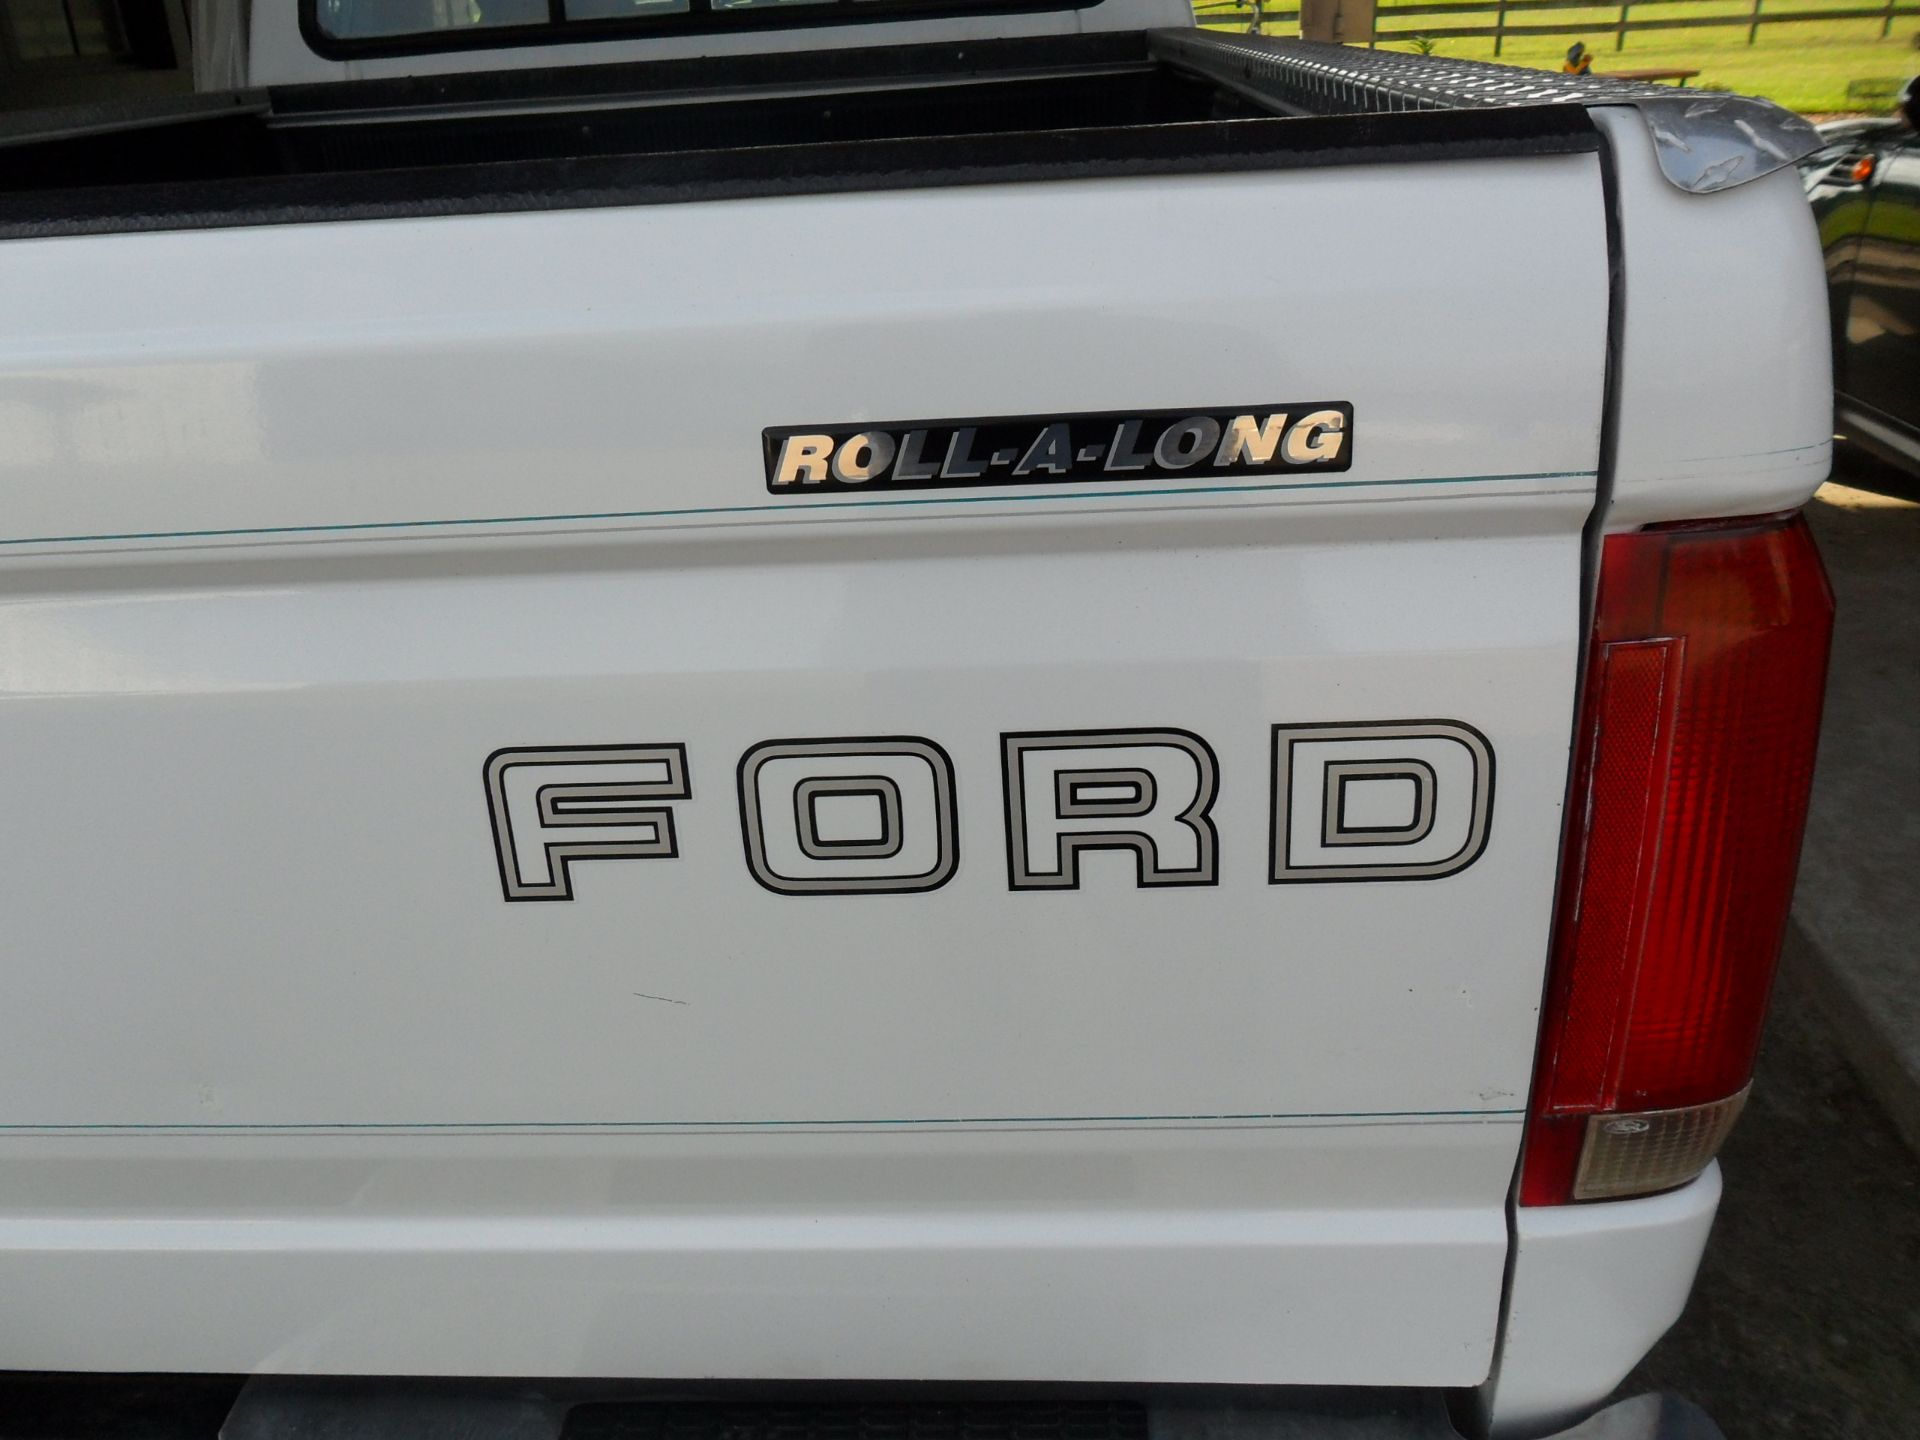 1995 Ford F250 Roll-A-Long Special Edition Pickup - Image 32 of 37